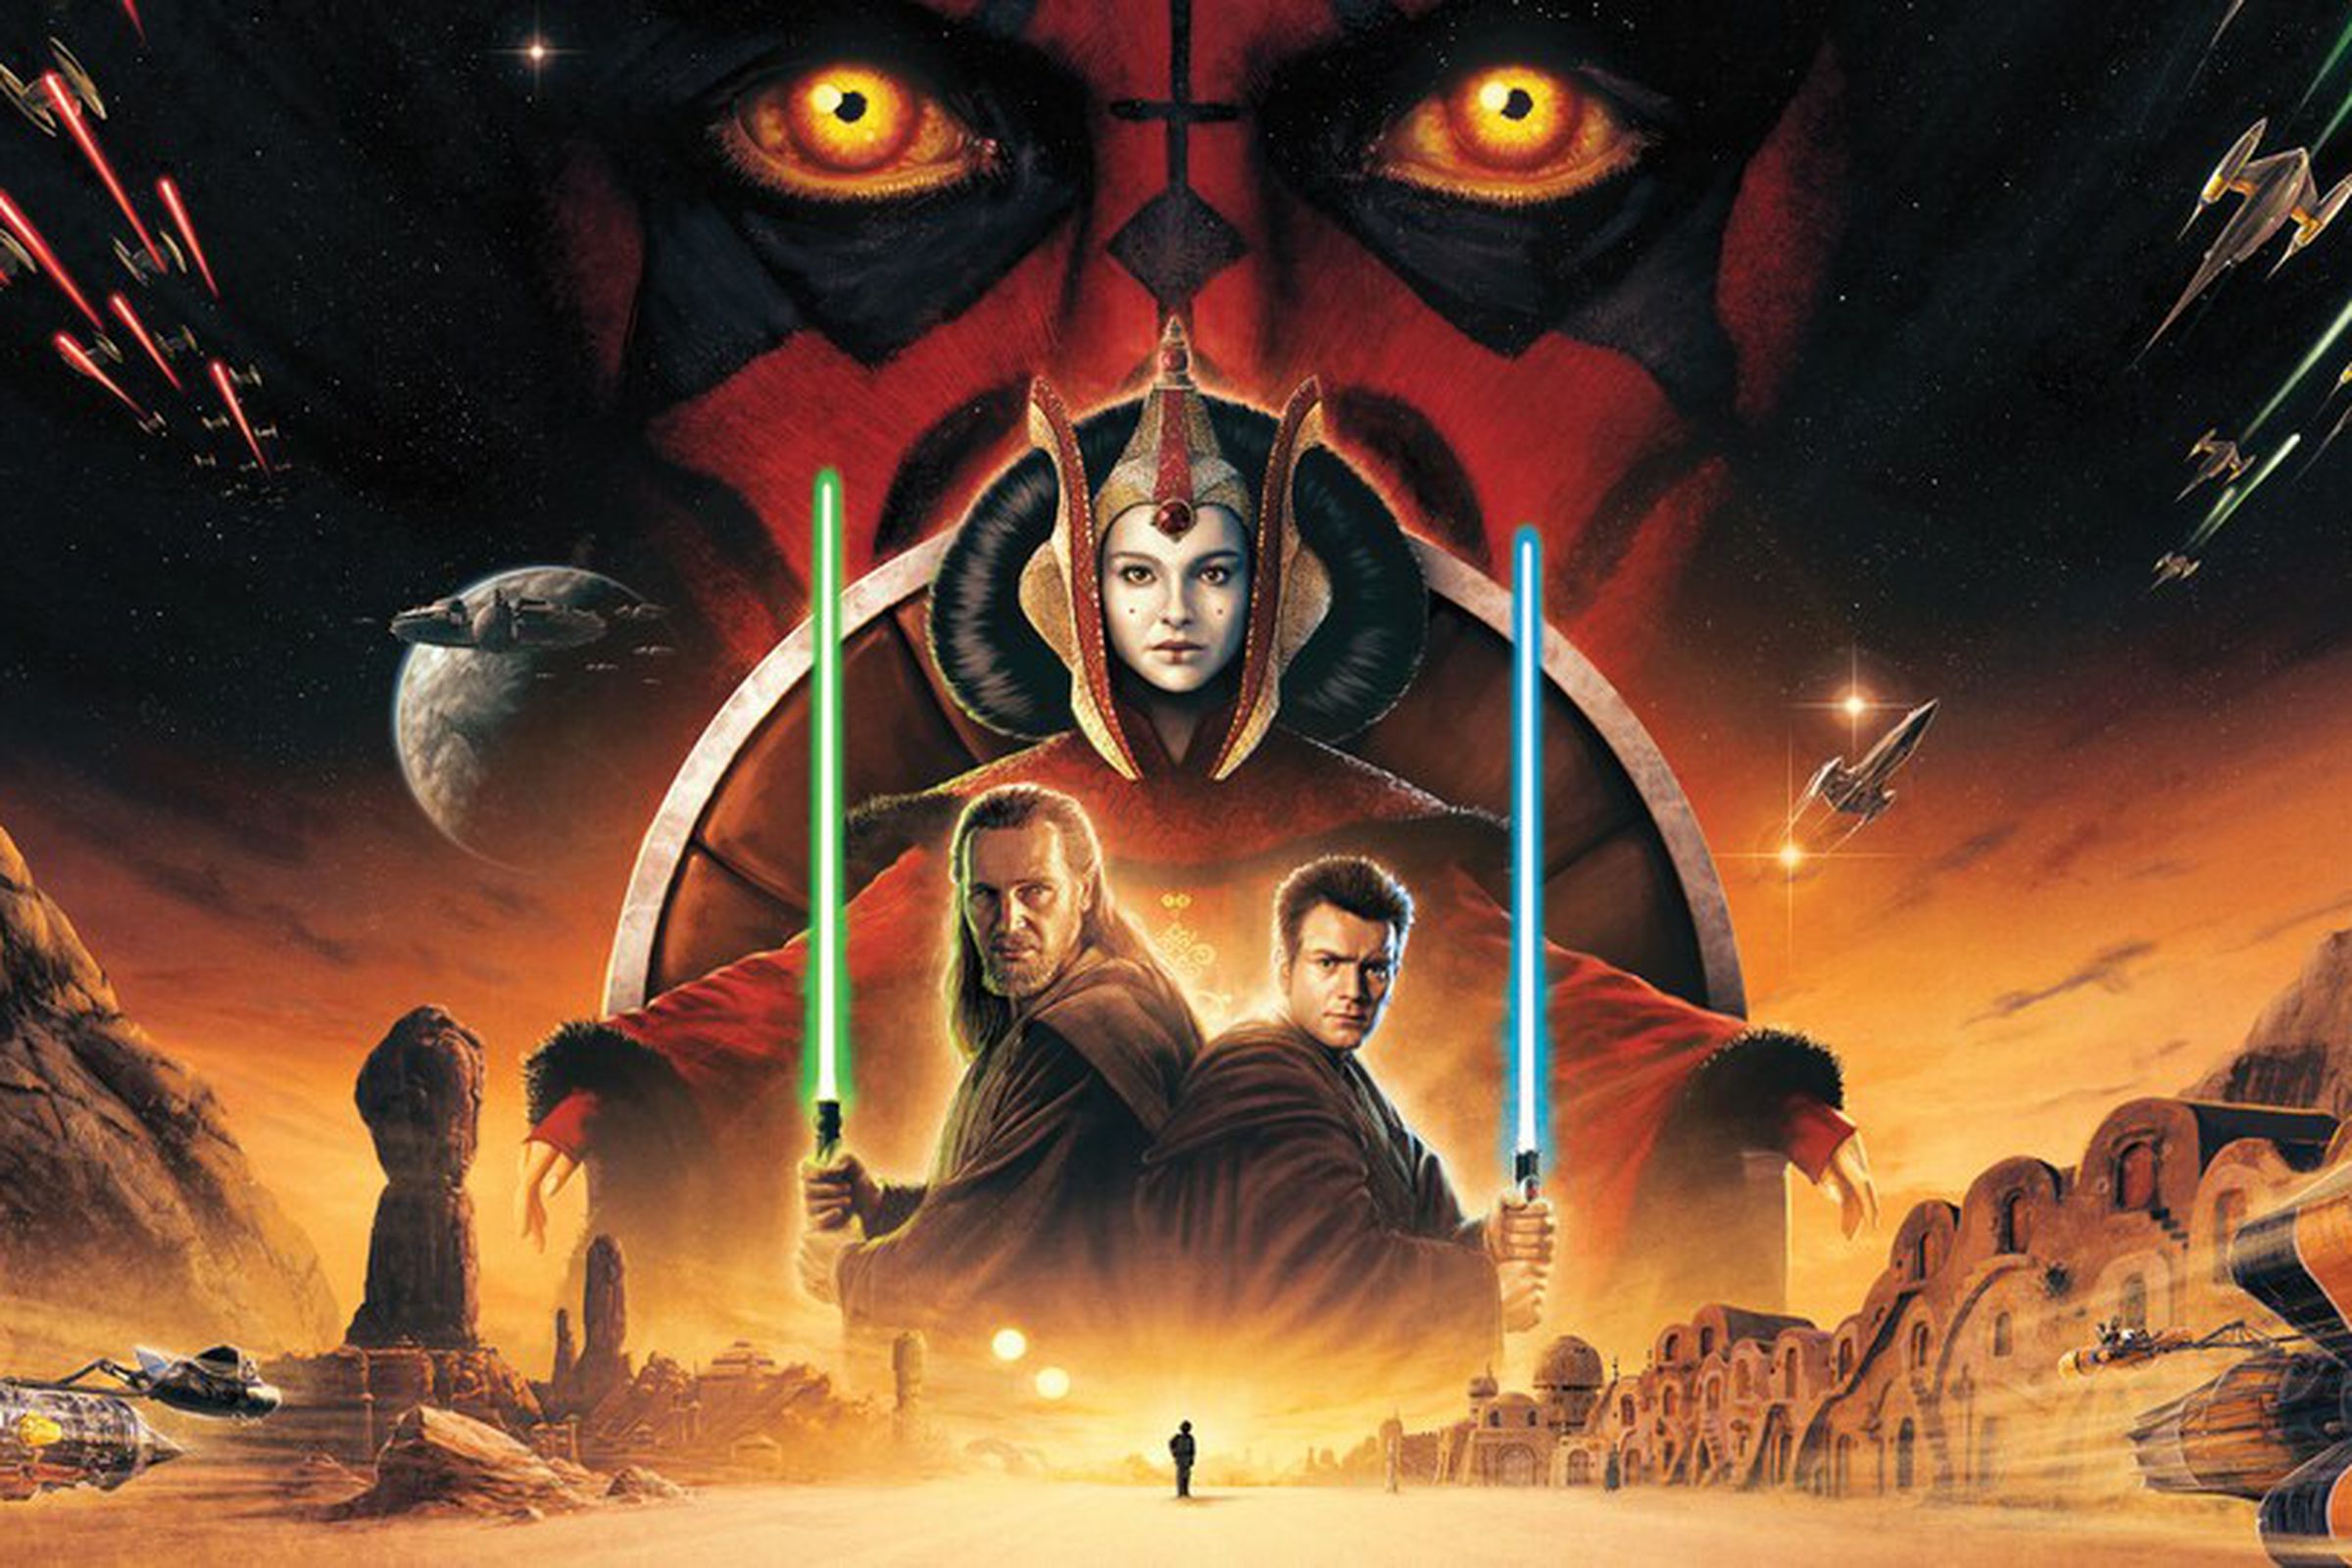 A poster for Star Wars Episode I depicts Qui-Gonn and Obi-wan with their lightsabers beneath Queen Amidala, with the upper part of Darth Maul looming behind them all. Below, Anakin’s shadow walks toward the setting suns of Tatooine. 